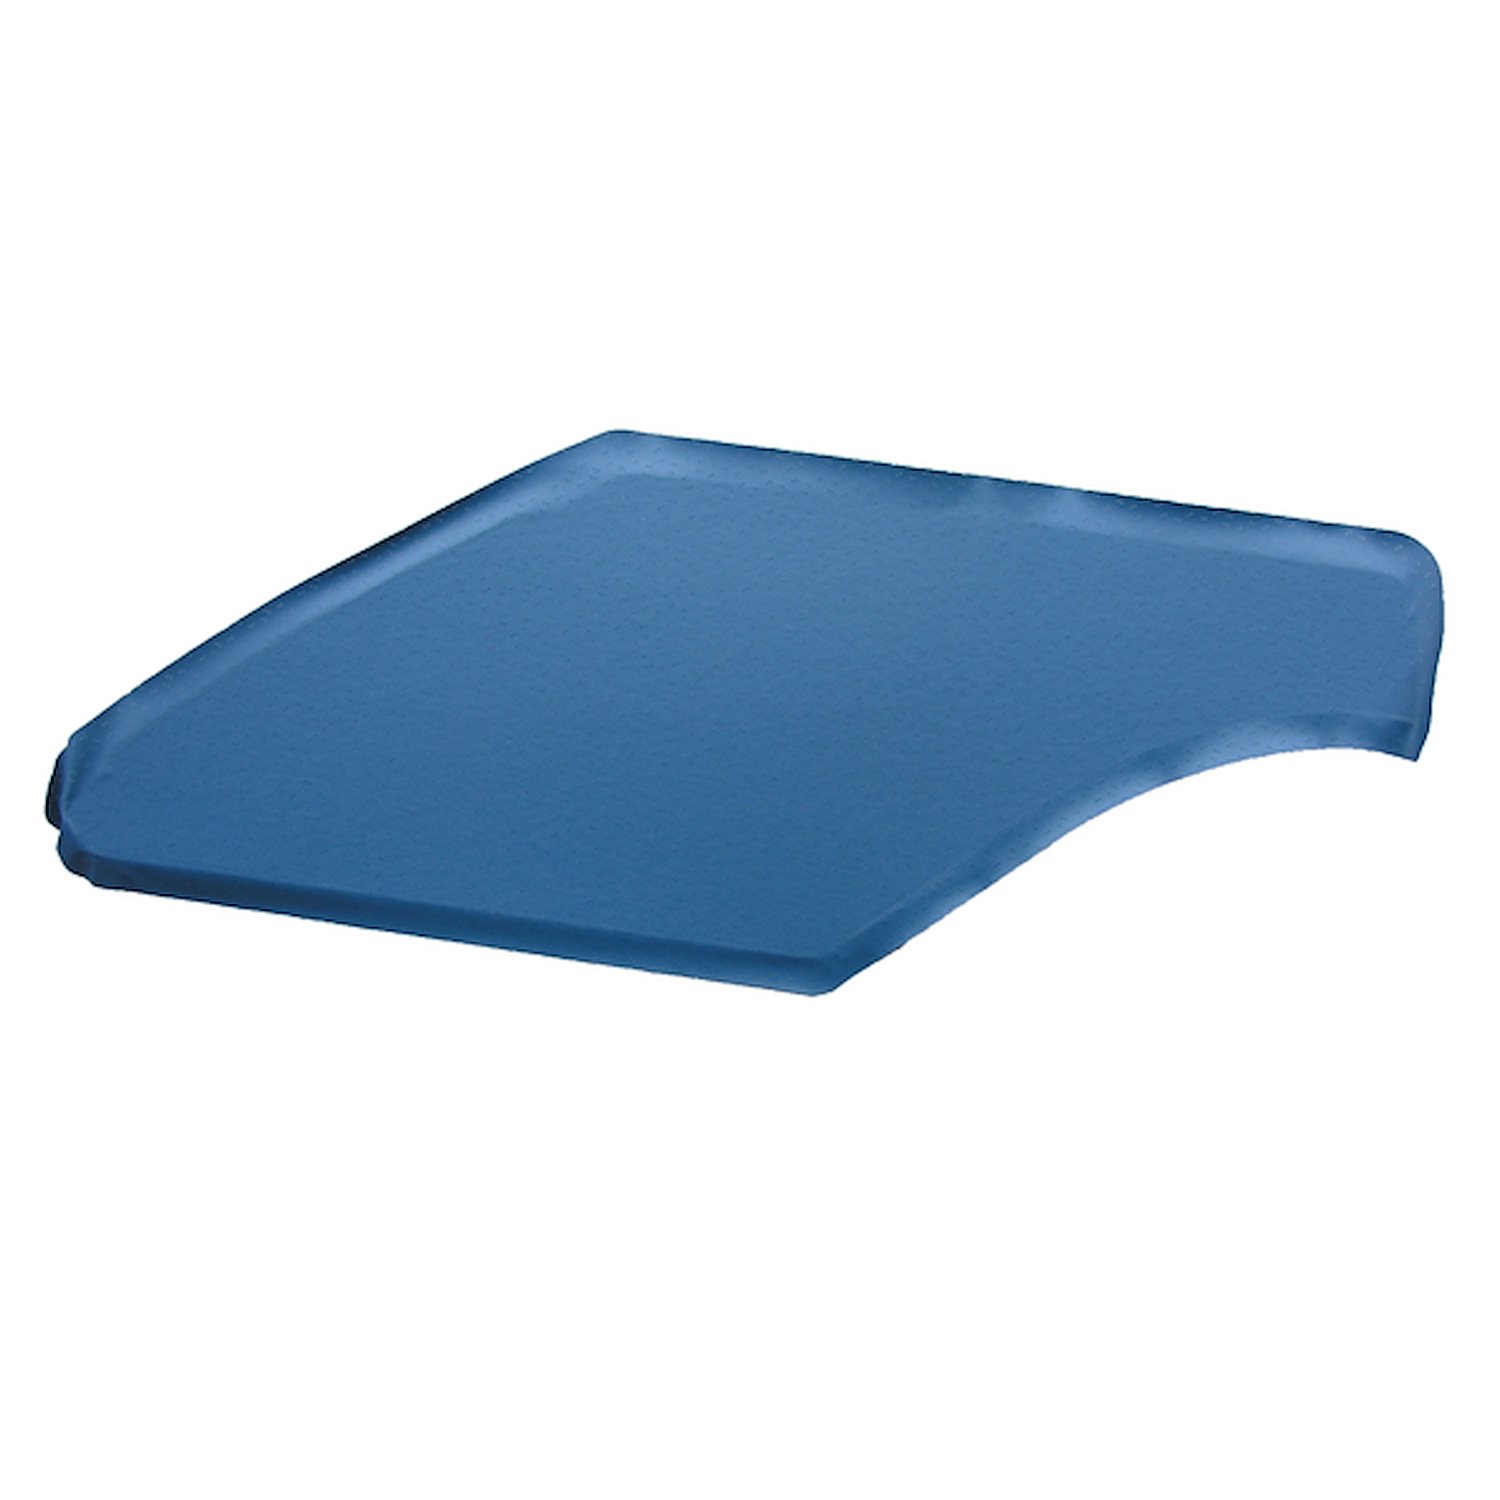 SB67CL00011 67/76 DART SAIL PANEL BOARDS MED BLUE PERFORATED